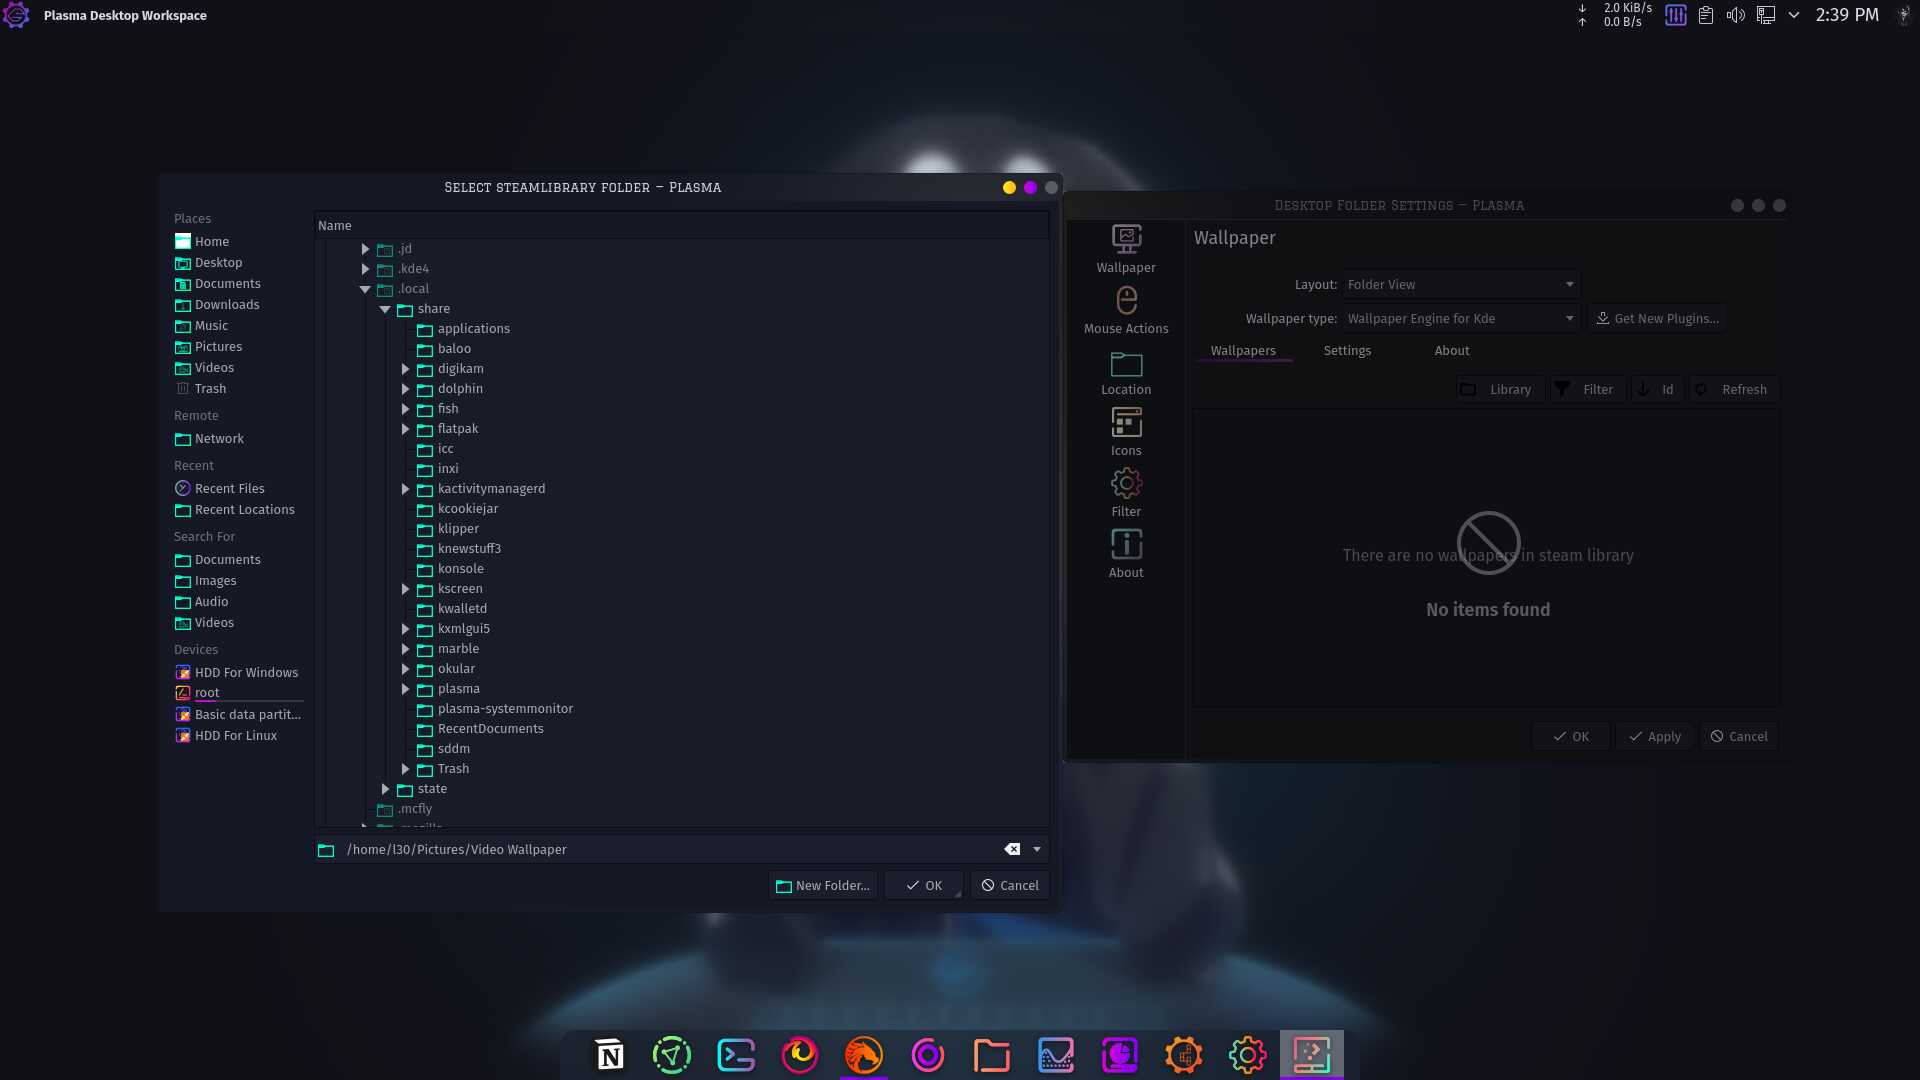 Wallpaper Engine for Kde There Are No Wallpapers in steam library -  Unsupported Software (AUR & Other) - Garuda Linux Forum